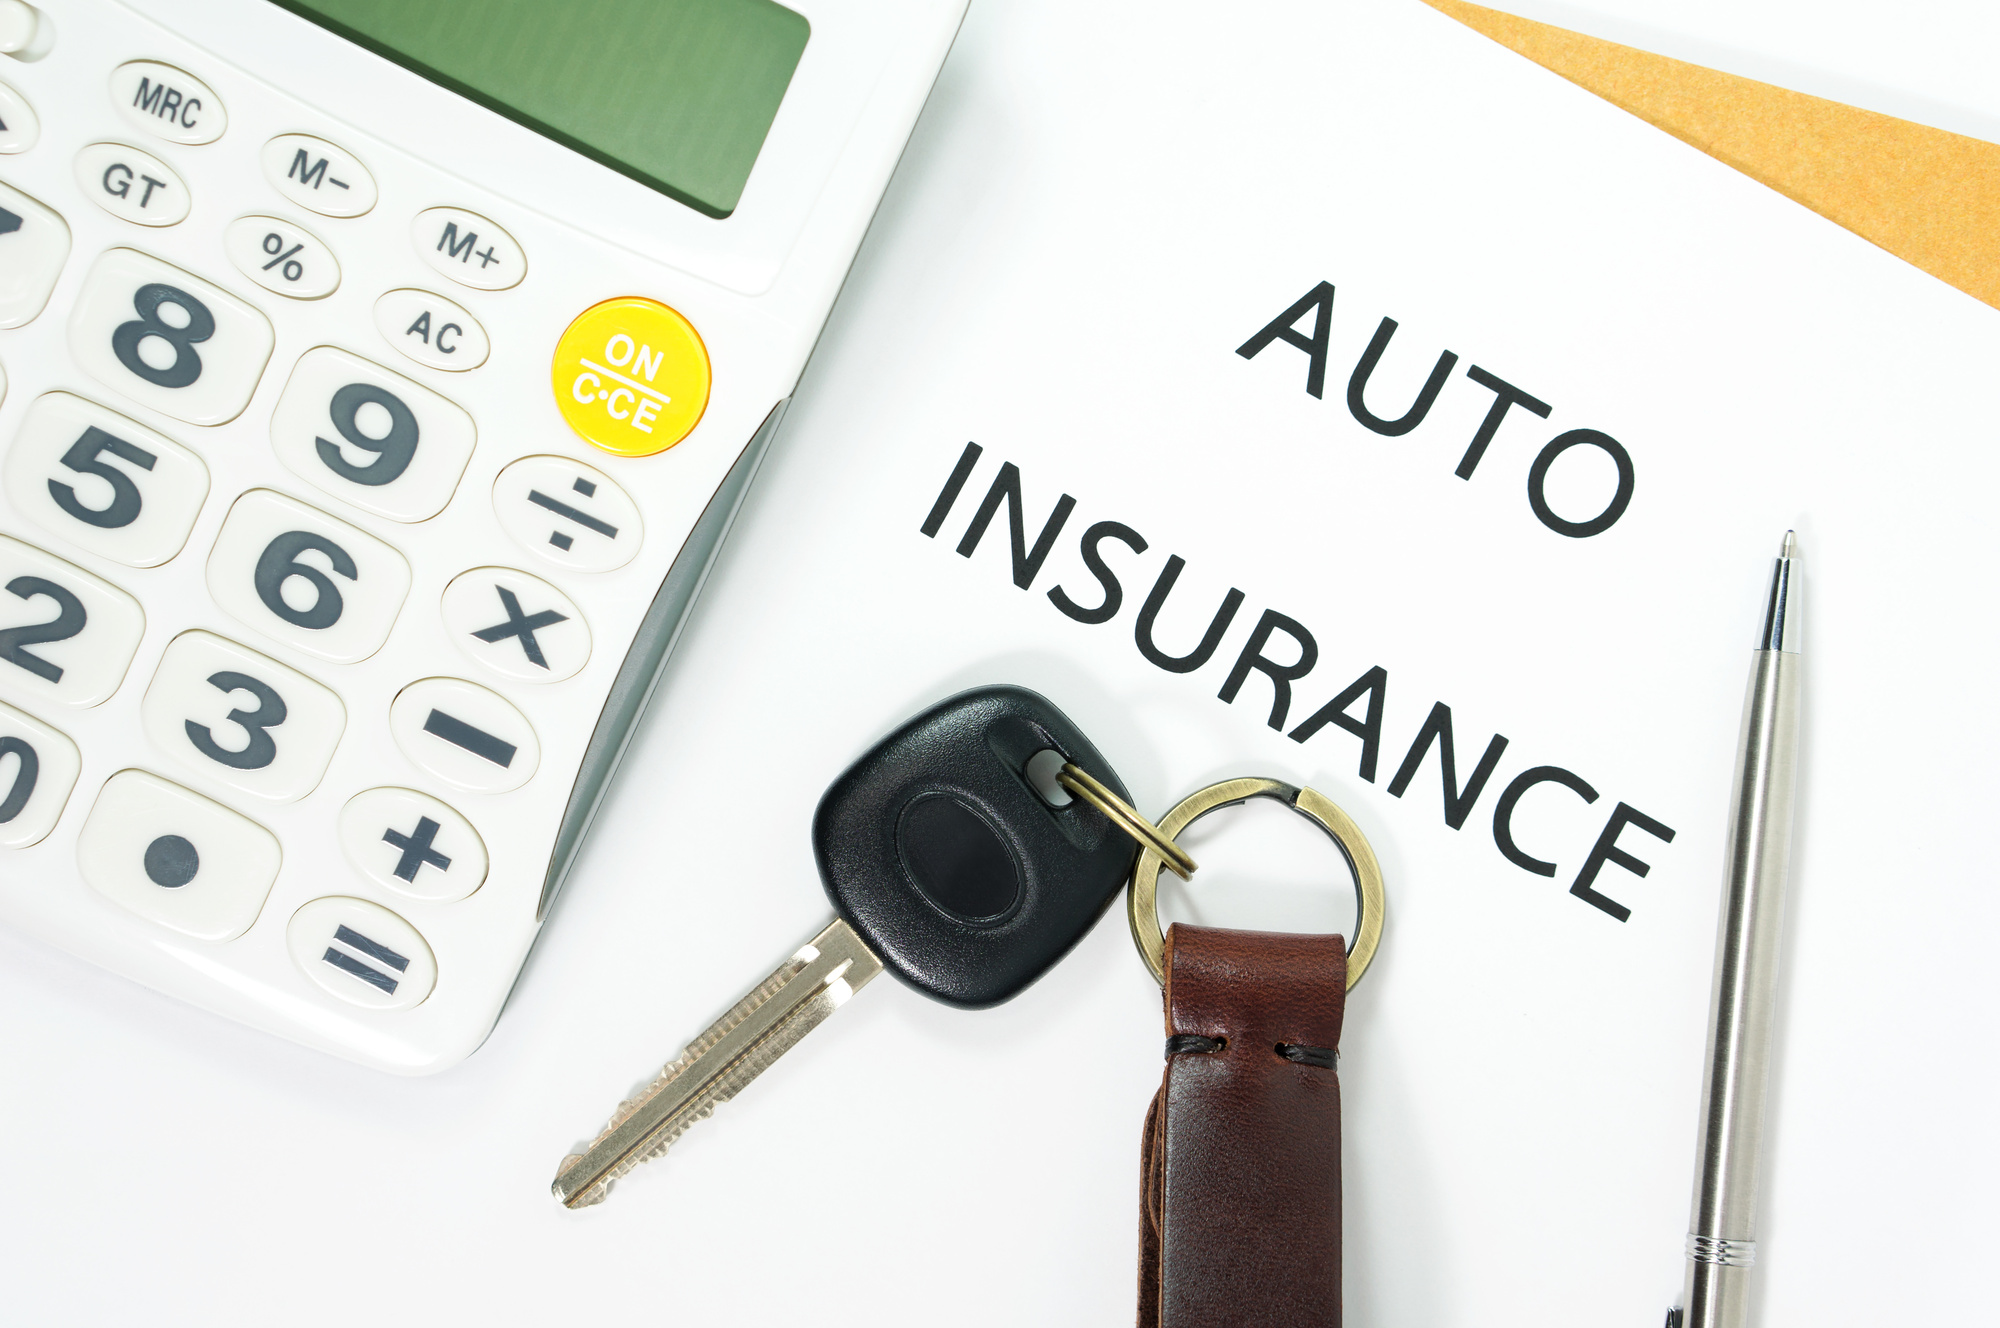 When you want to pay less for your car insurance, click here to explore effective options on how to lower an auto insurance premium.